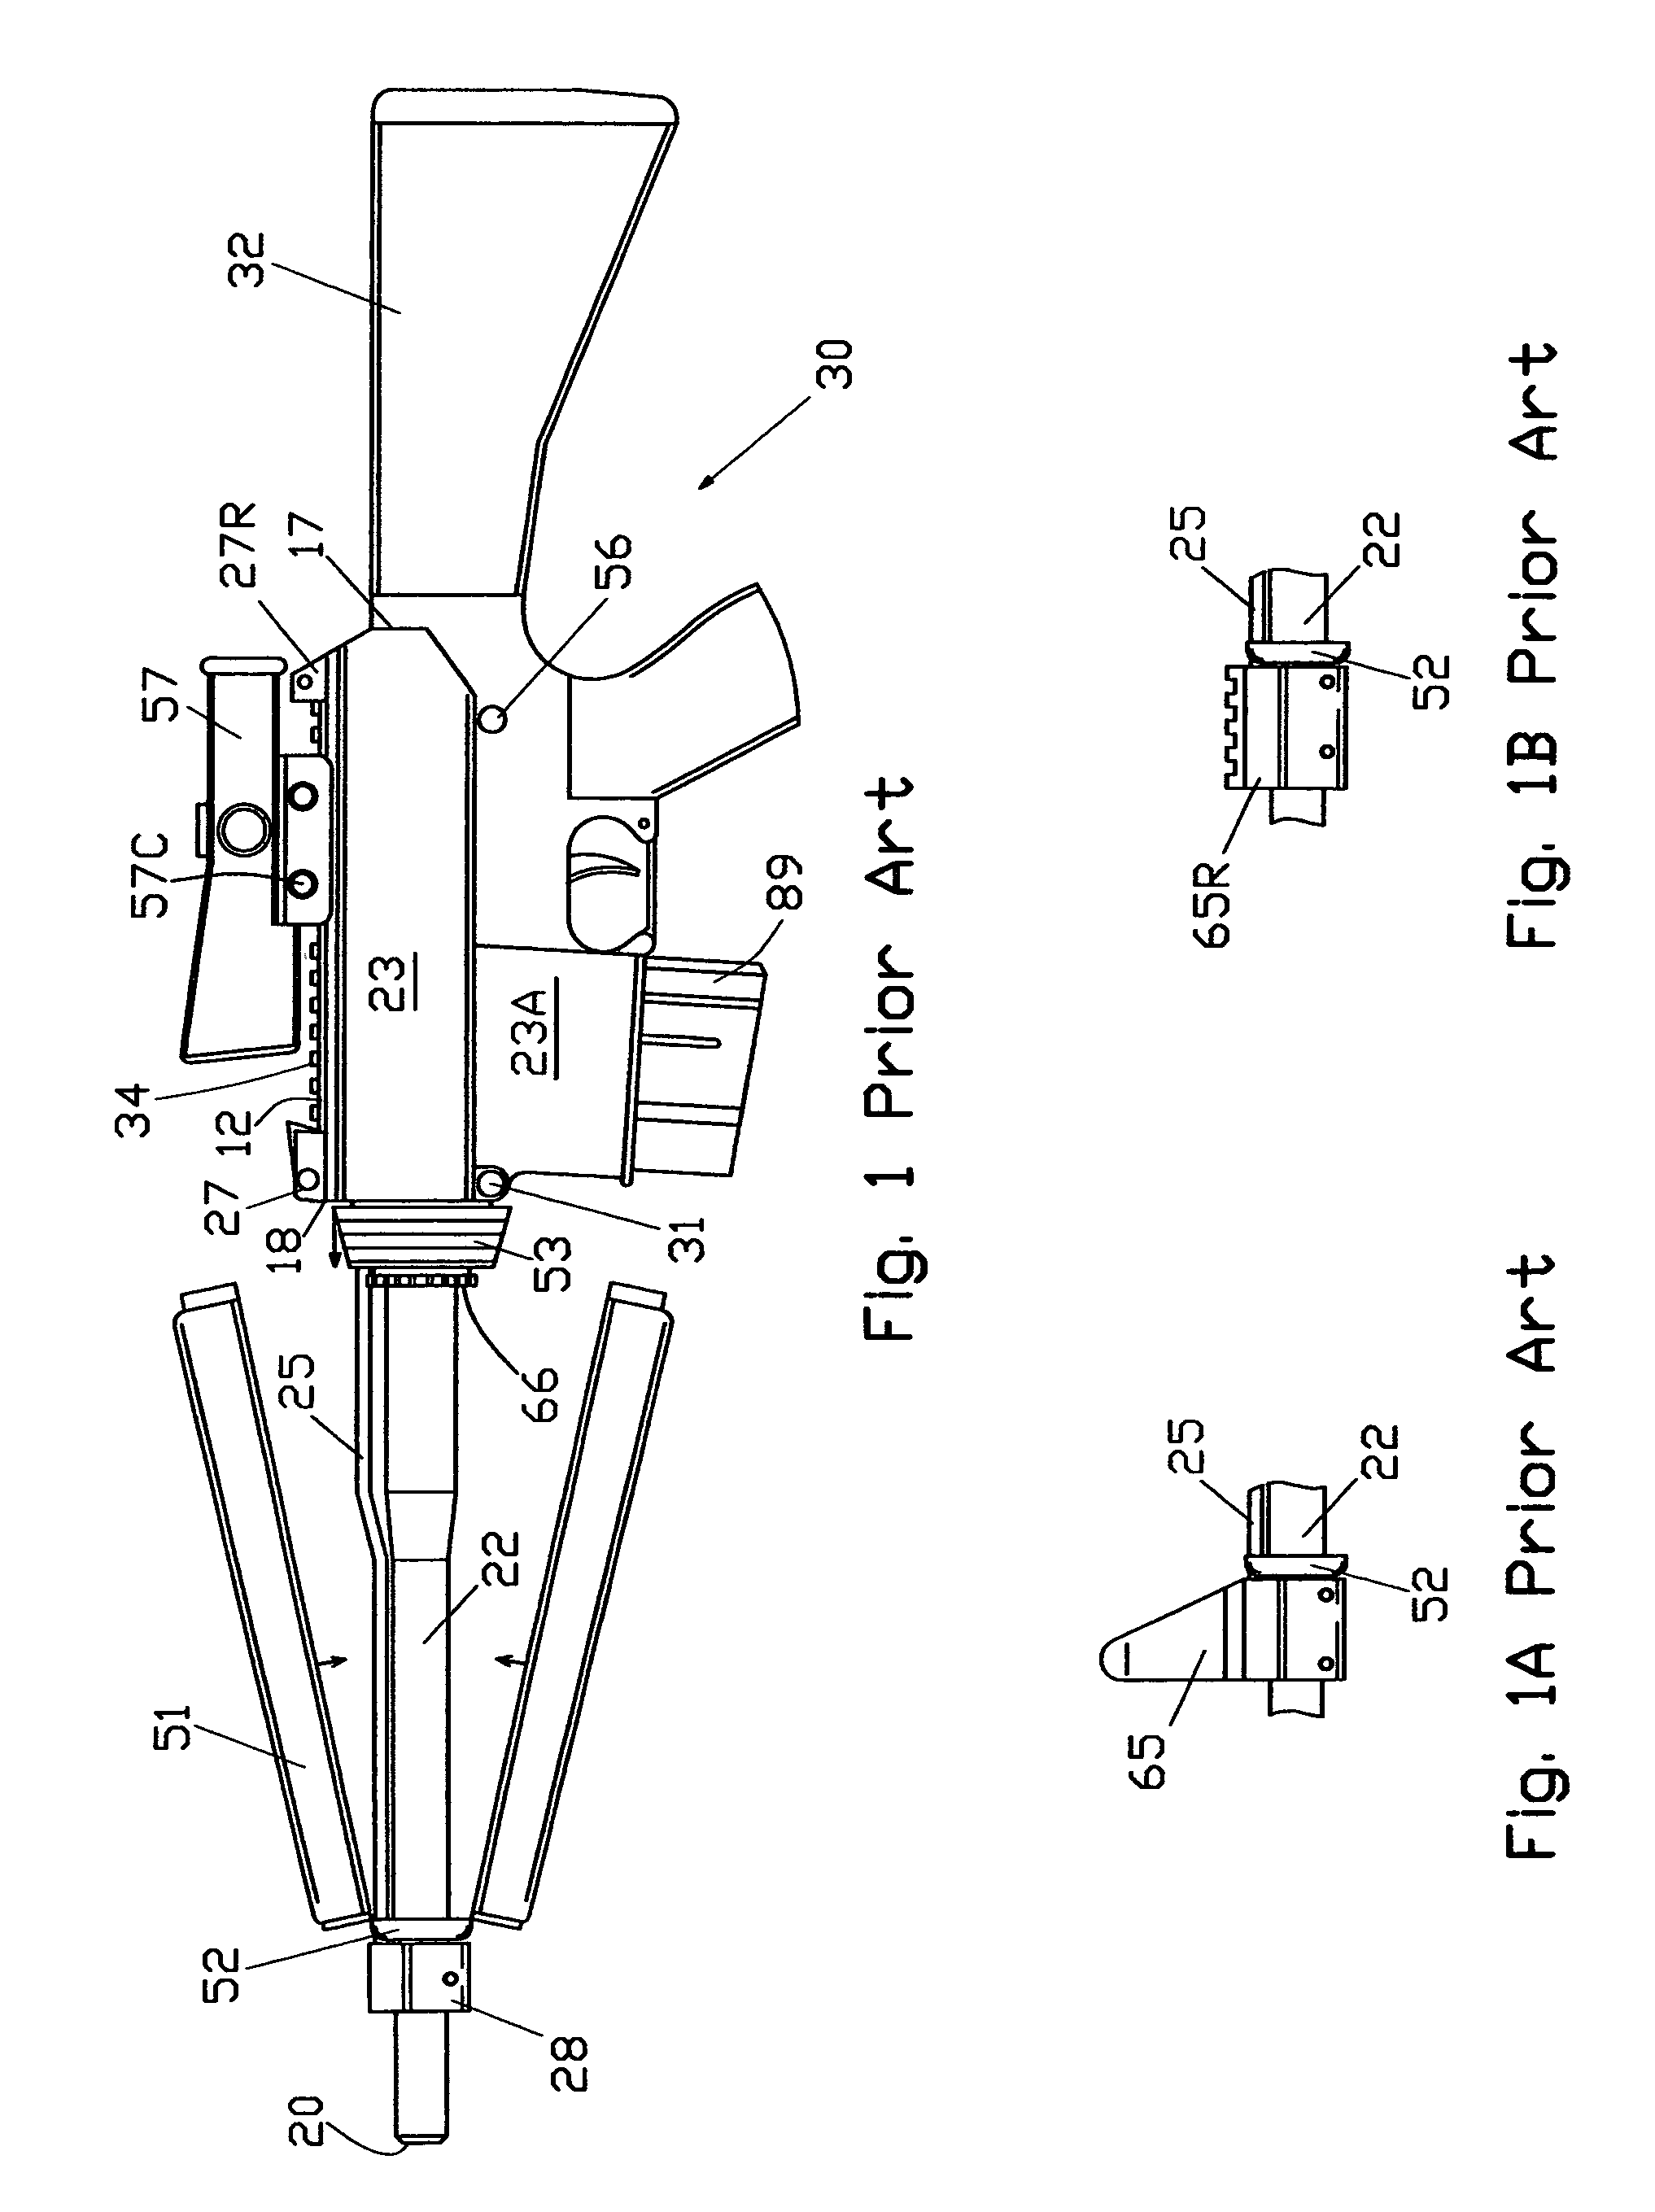 Handguard system integrated to a firearm